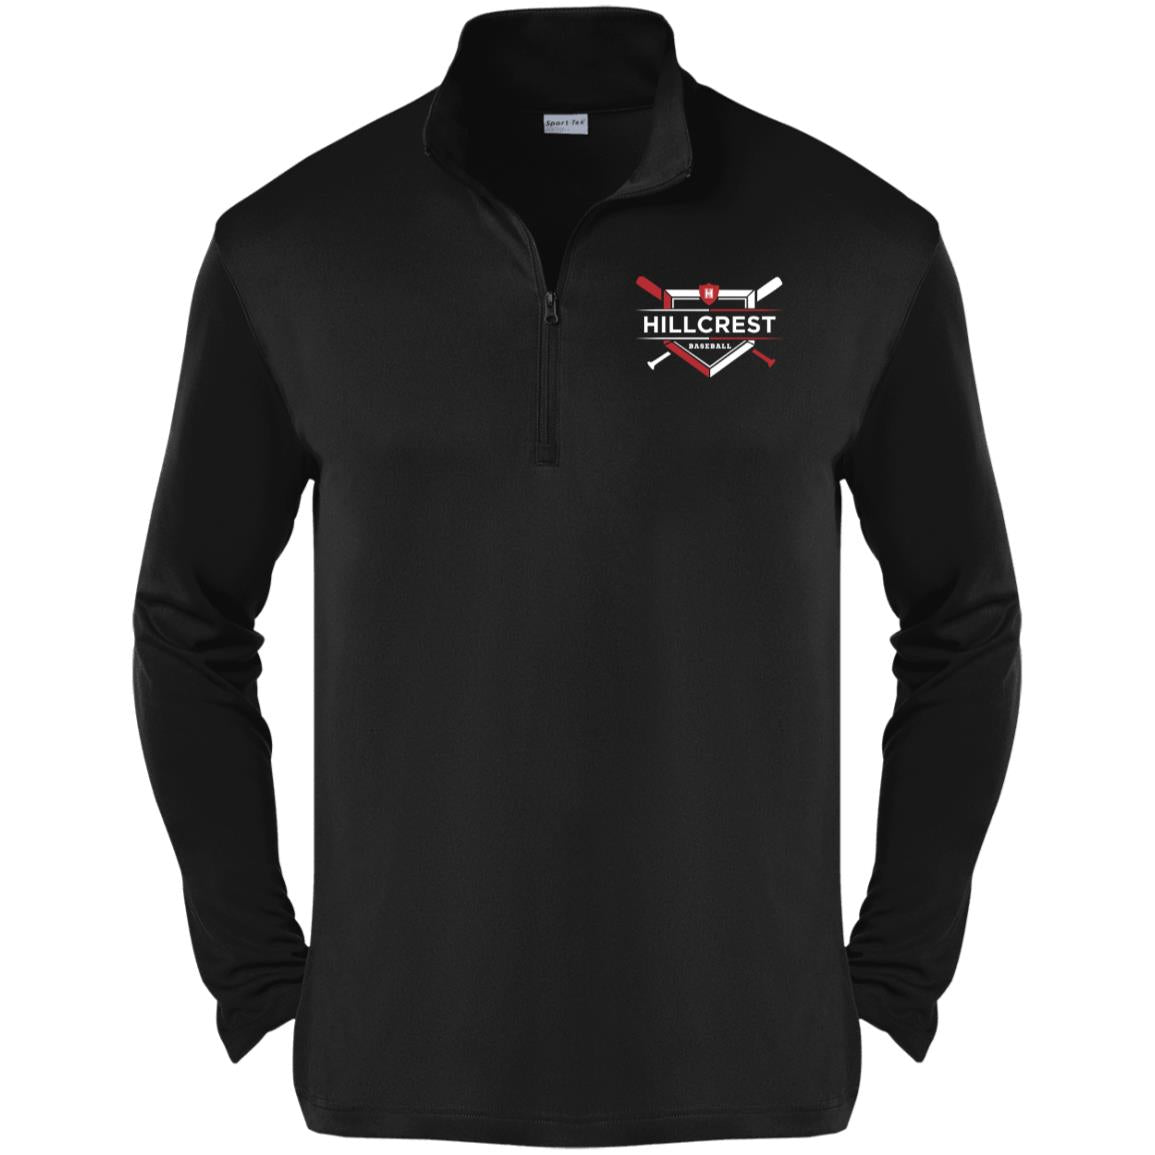 Comet Baseball - Competitor 1/4-Zip Pullover